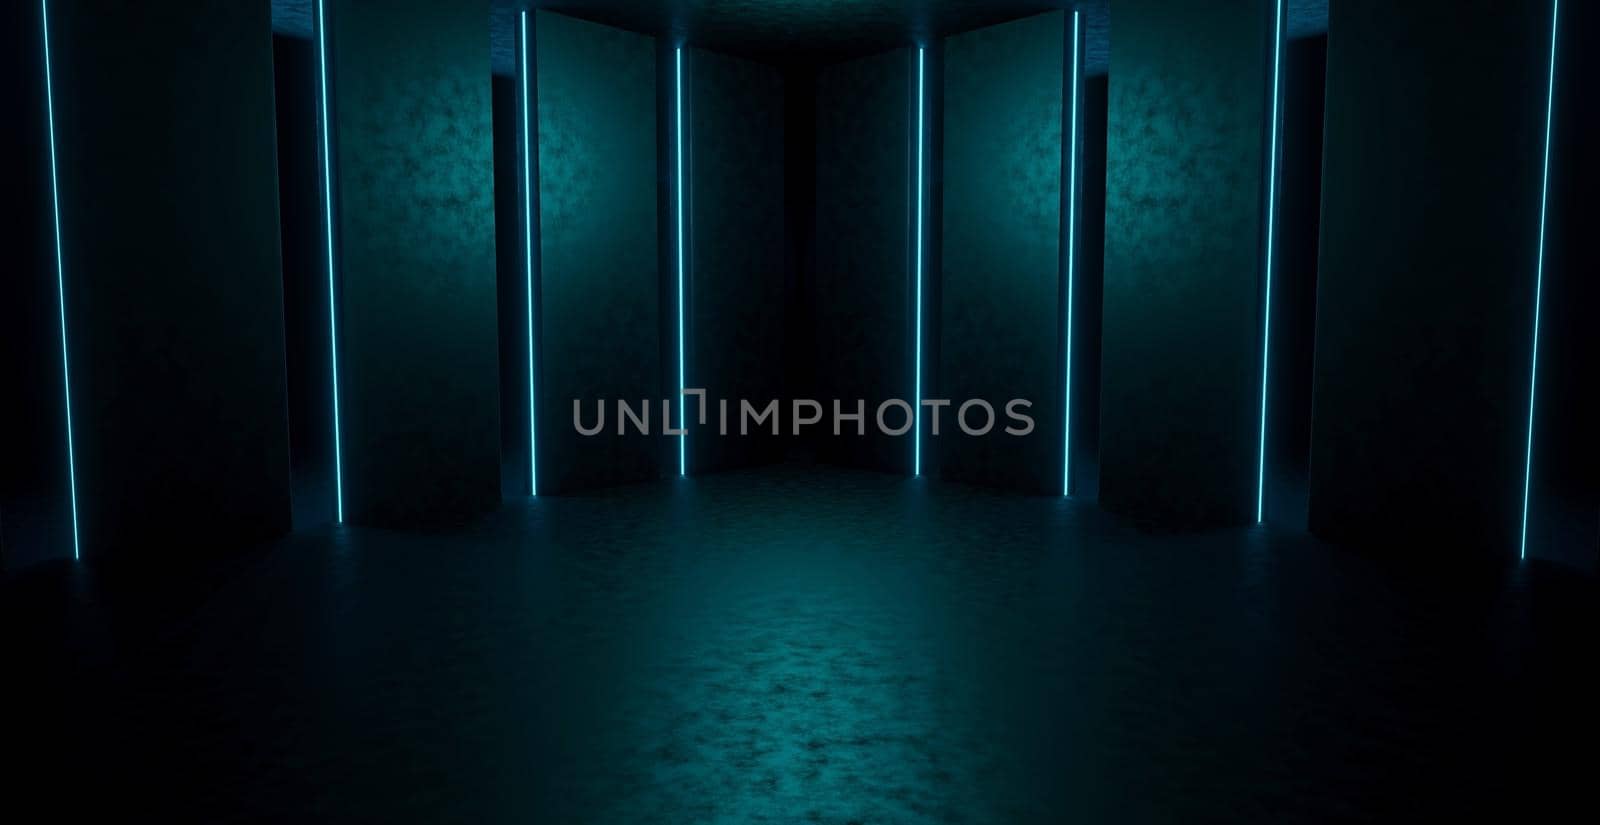 Extraterrestrial Empty Glowing Vibrant Laser Showcase Stage Corridor Hallway Entrance Dark Blue Background Digital Futurism Concept For Product Backgrounds Presentation 3D Rendering by yay_lmrb